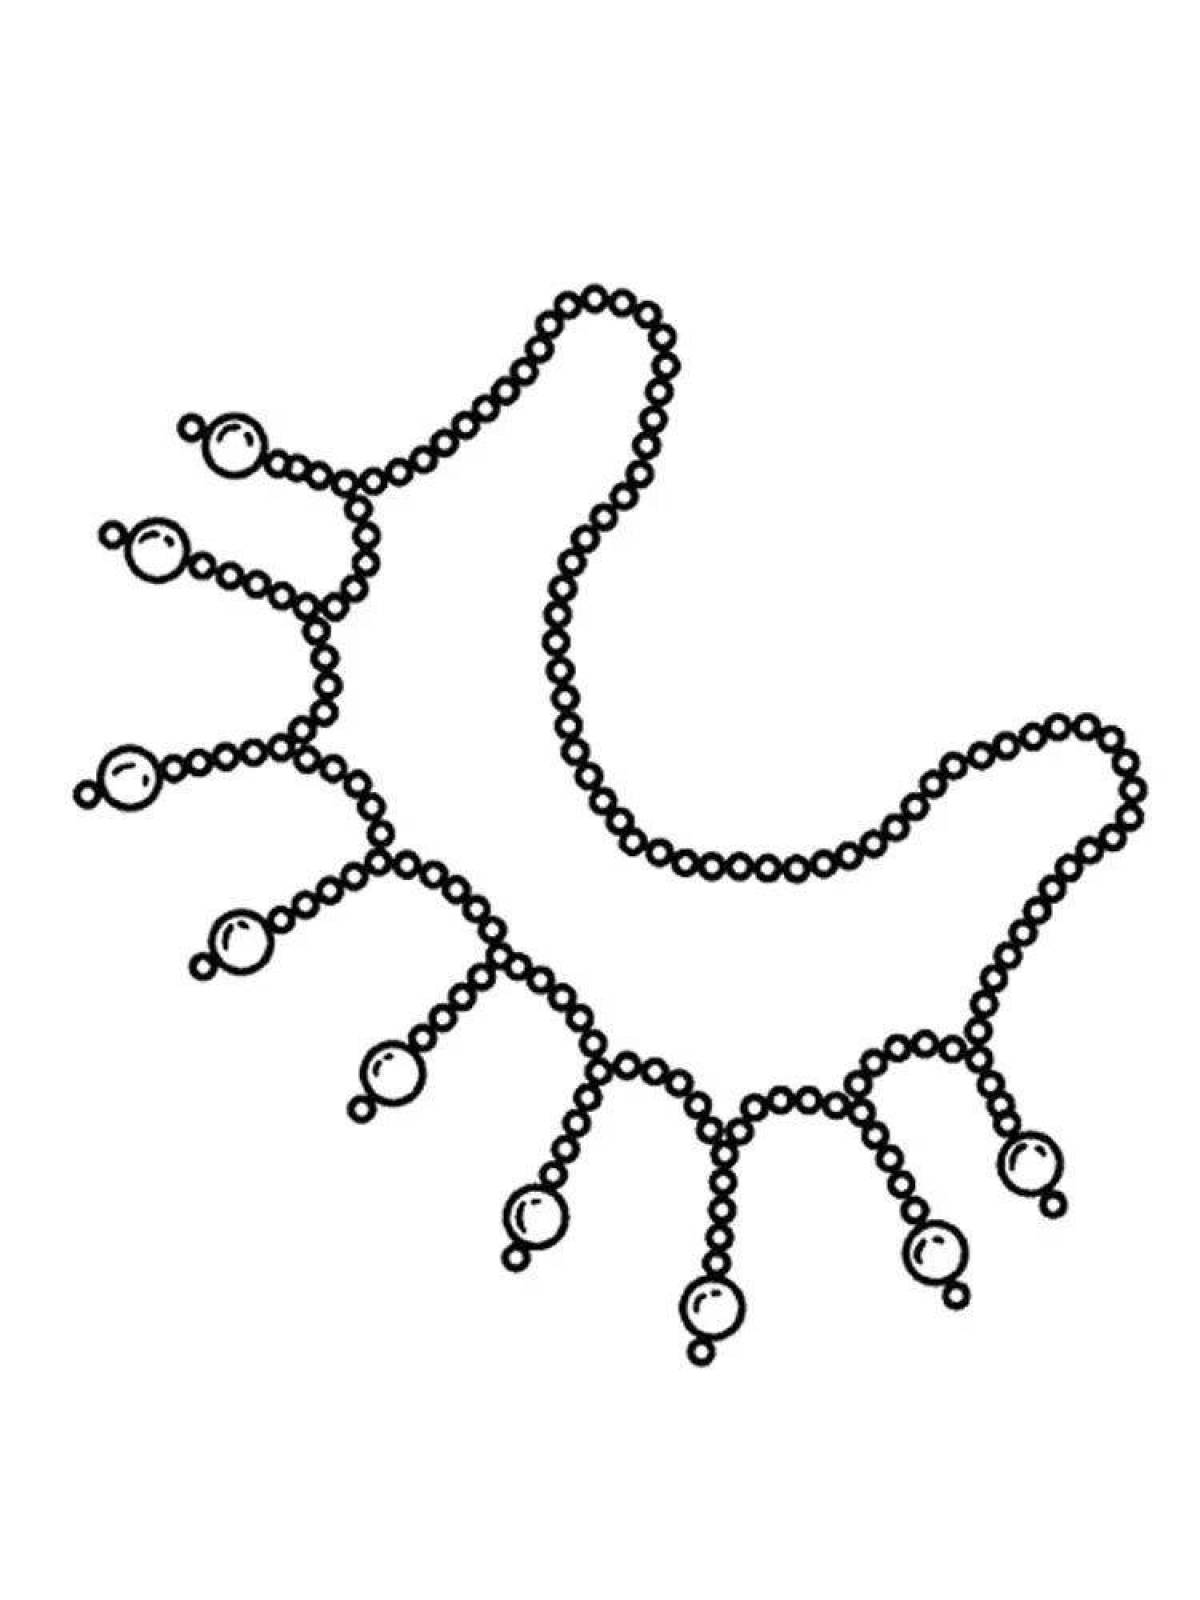 Sparkling necklace coloring page